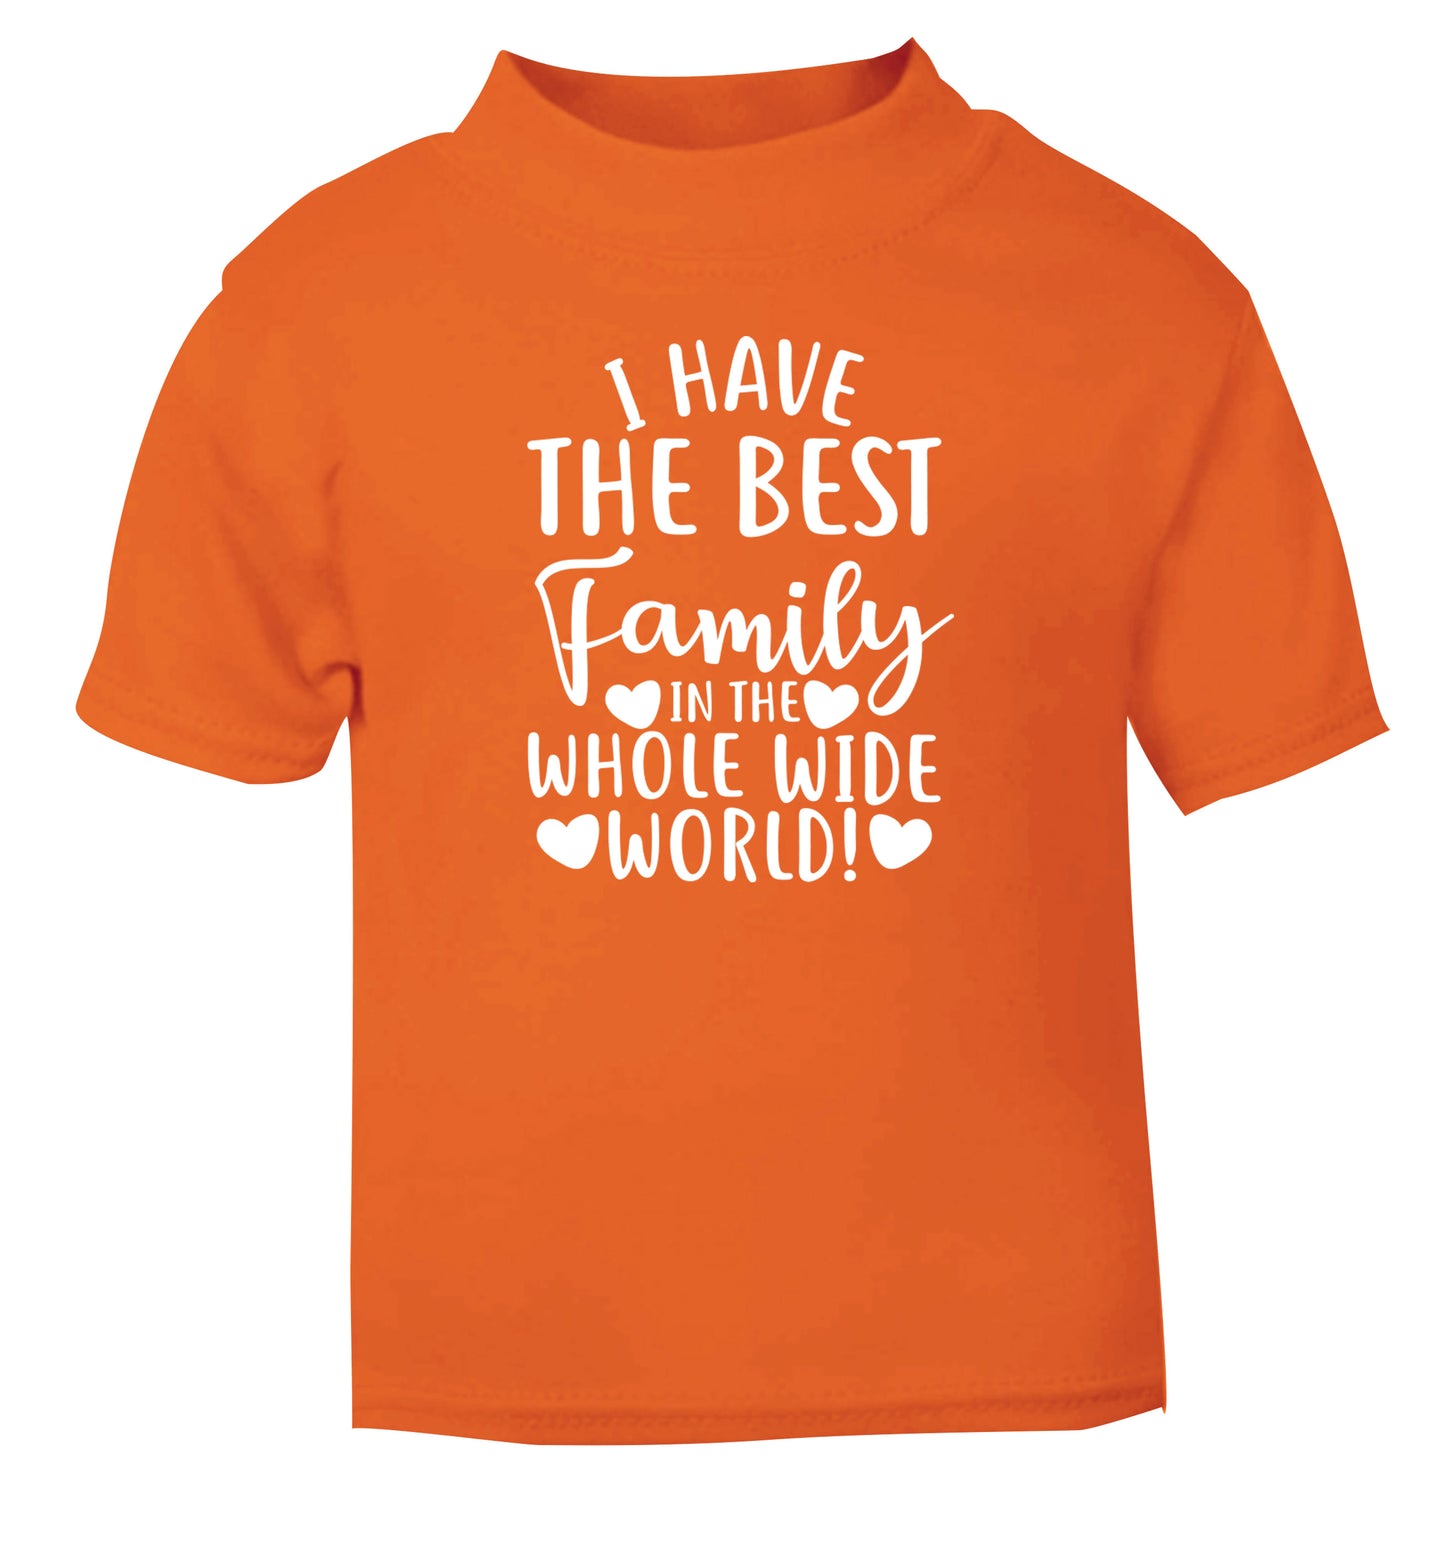 I have the best family in the whole wide world! orange Baby Toddler Tshirt 2 Years